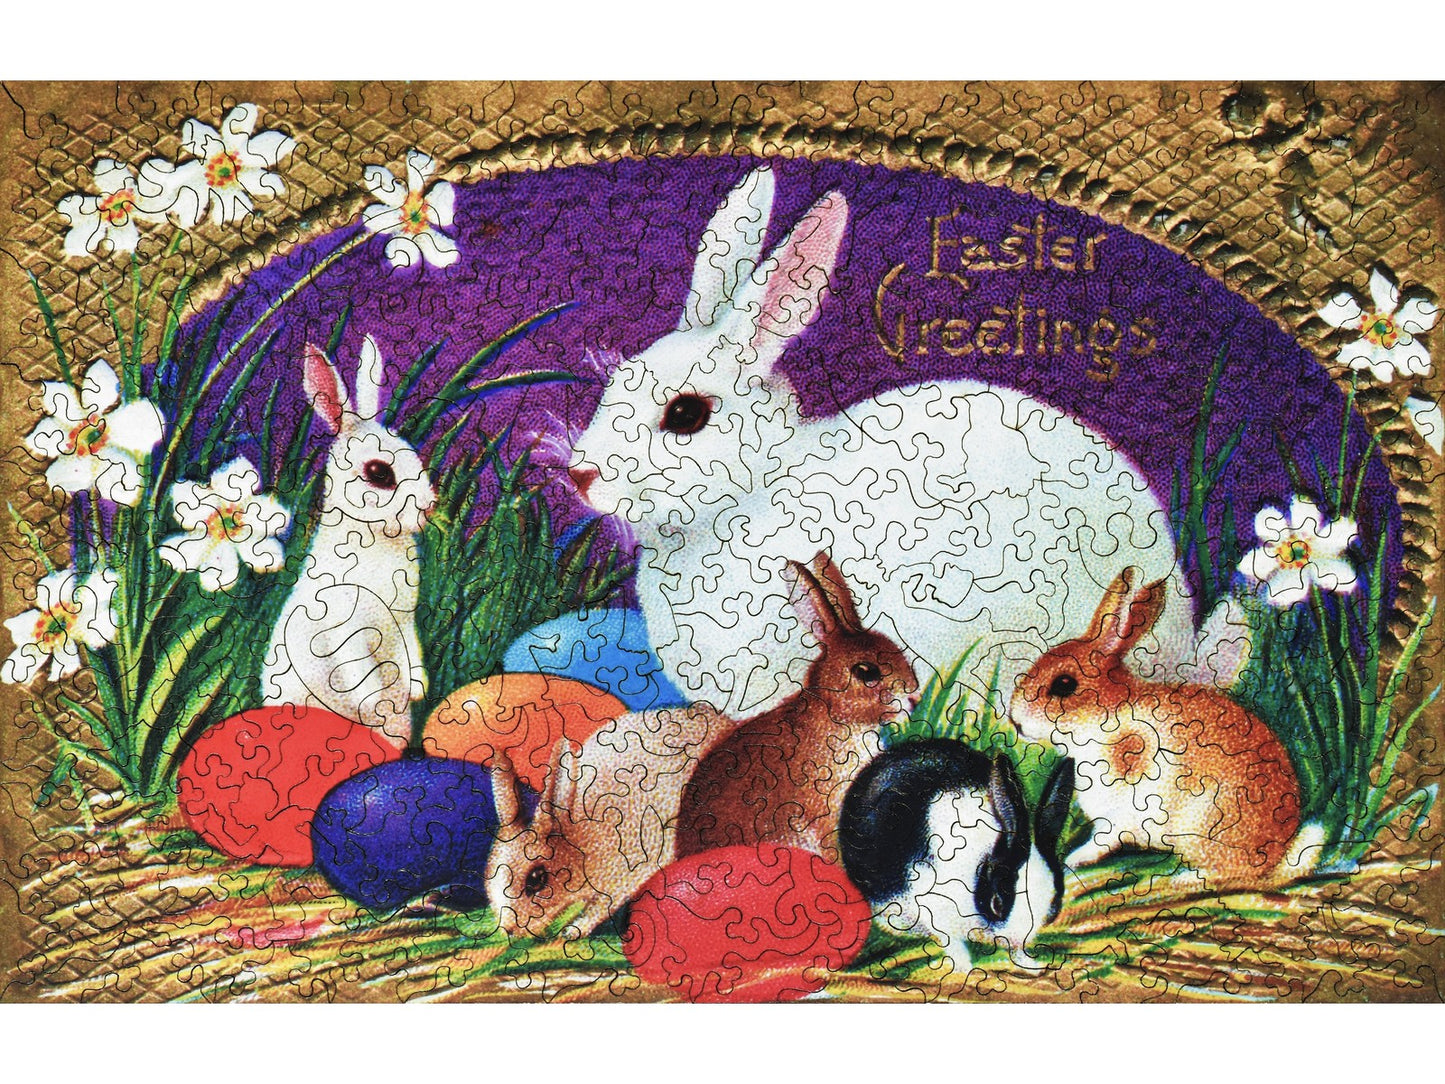 The front of the puzzle, Hoppy Easter, with rabbits and Easter eggs.